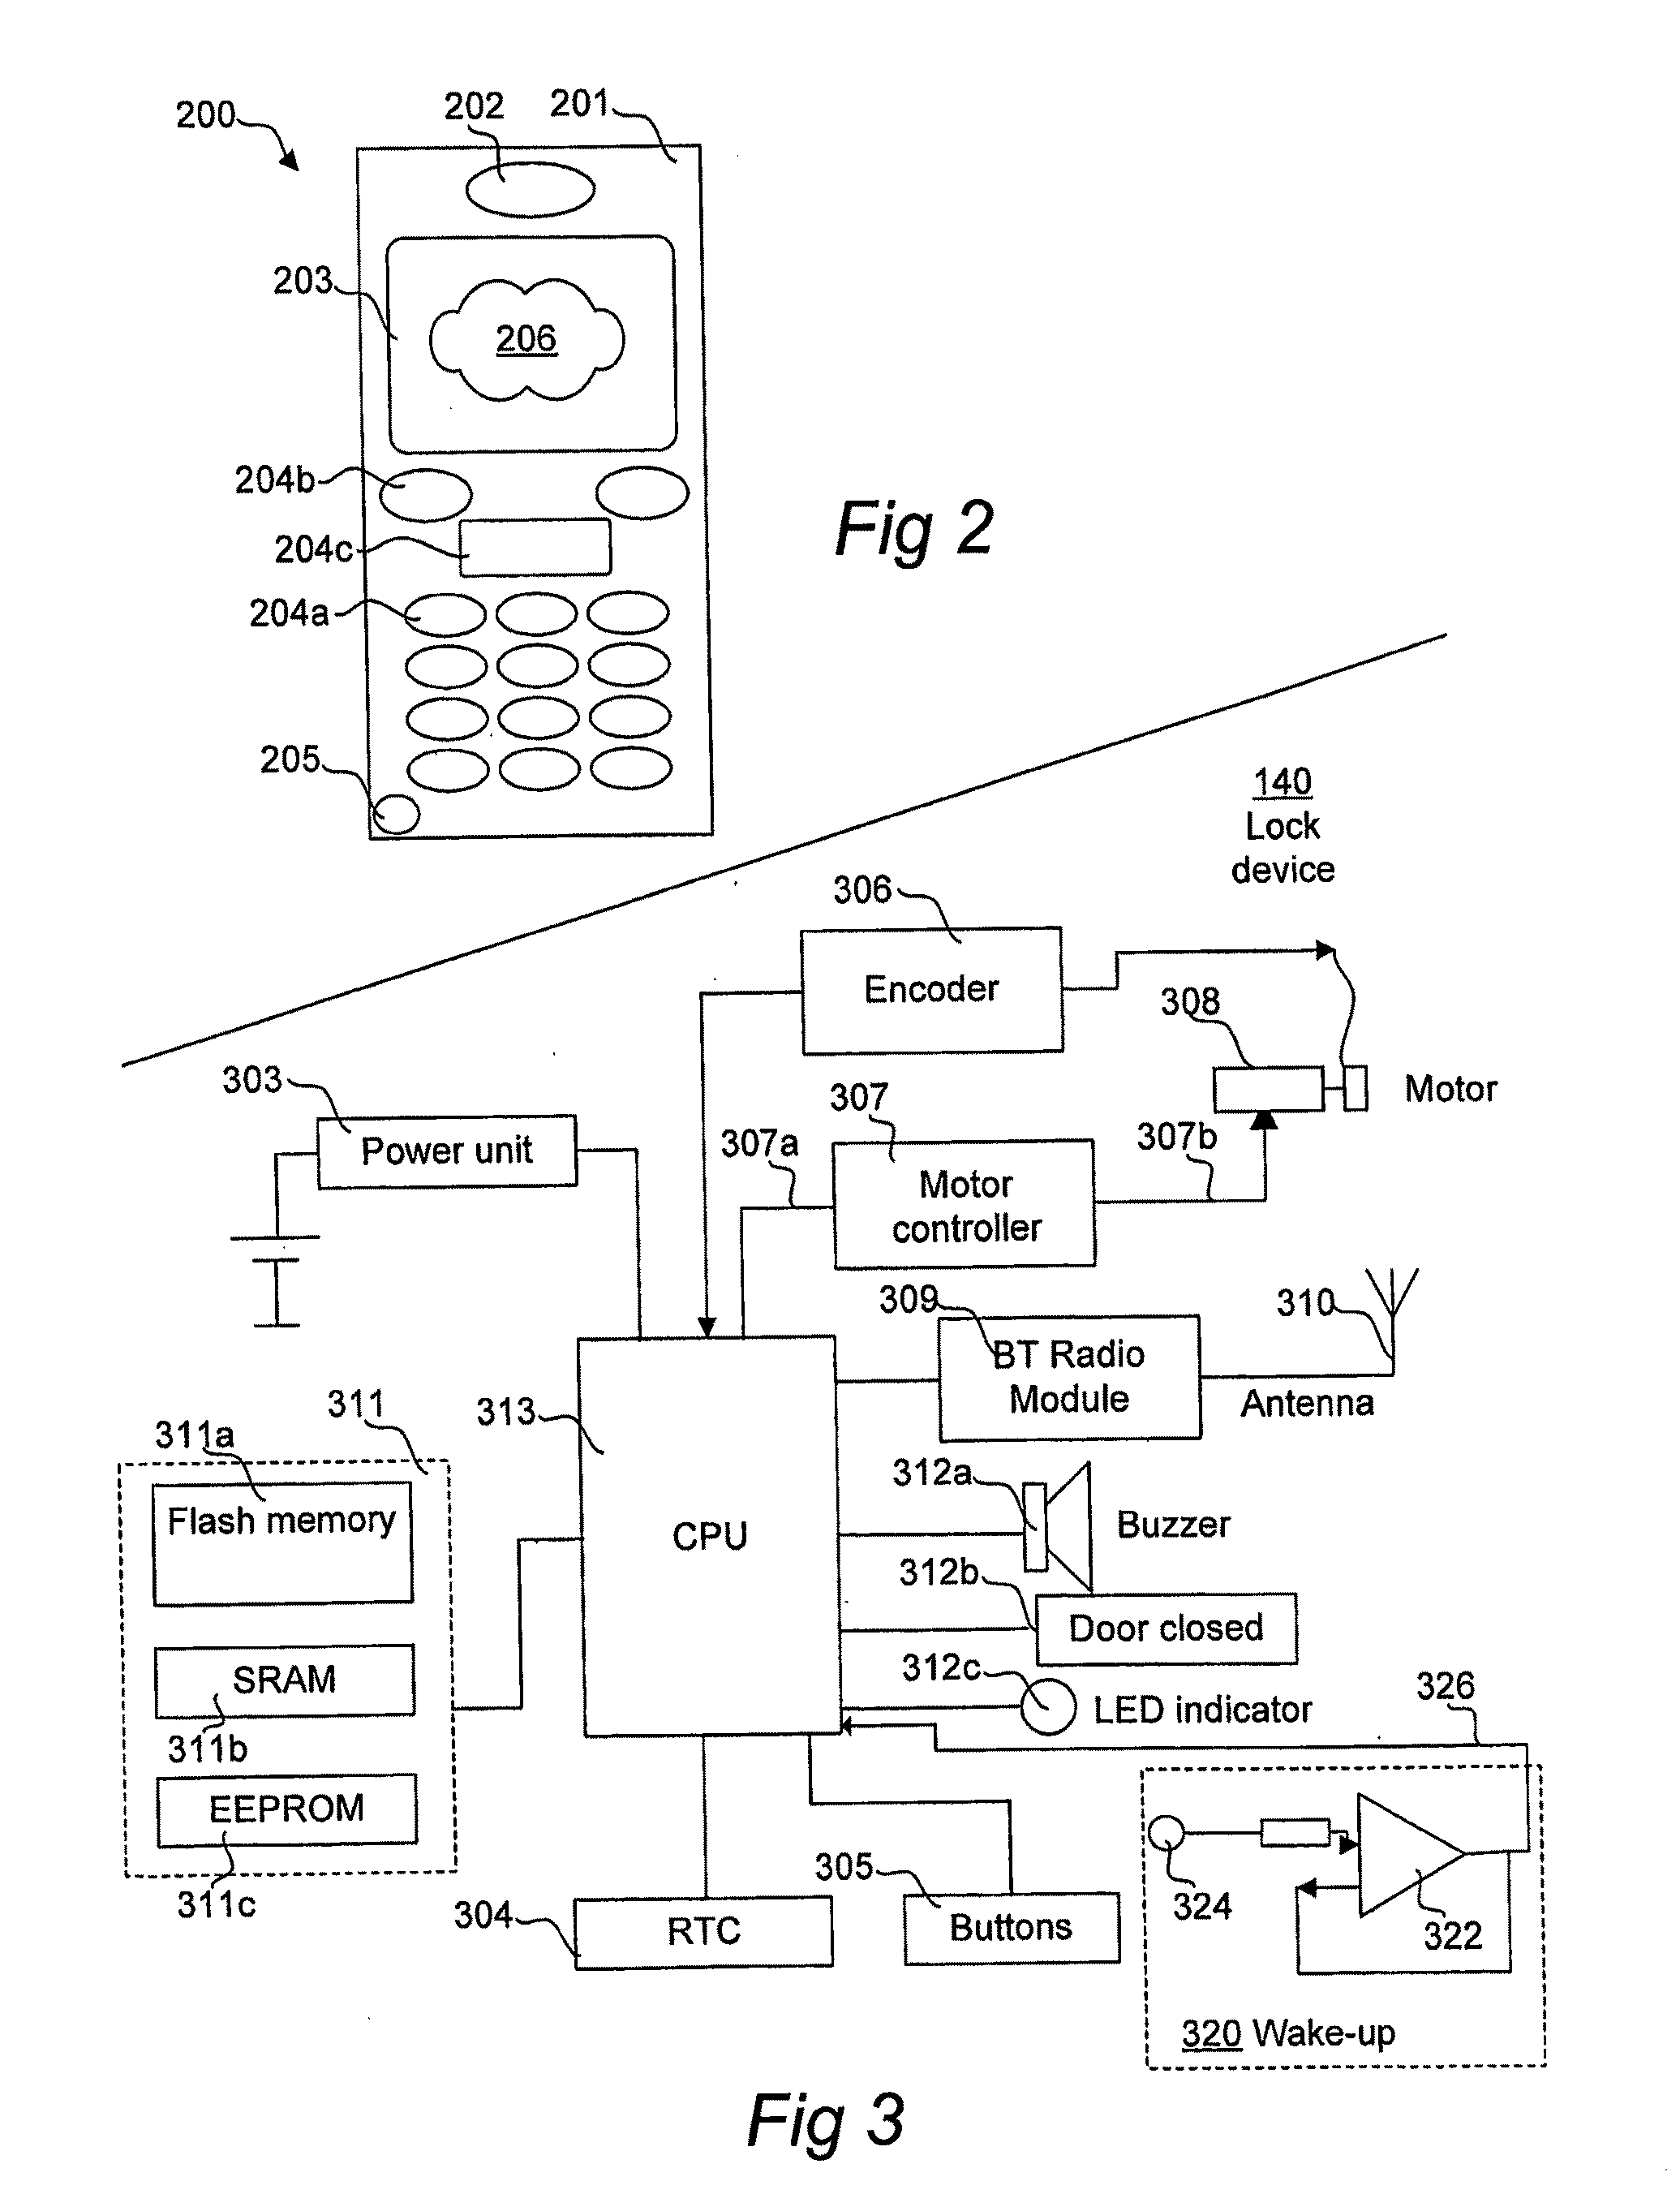 Method for Unlocking a Lock by a Lock Device Enabled for Short-Range Wireless Data Communication in Compliance With a Communication Standard and Associated Device